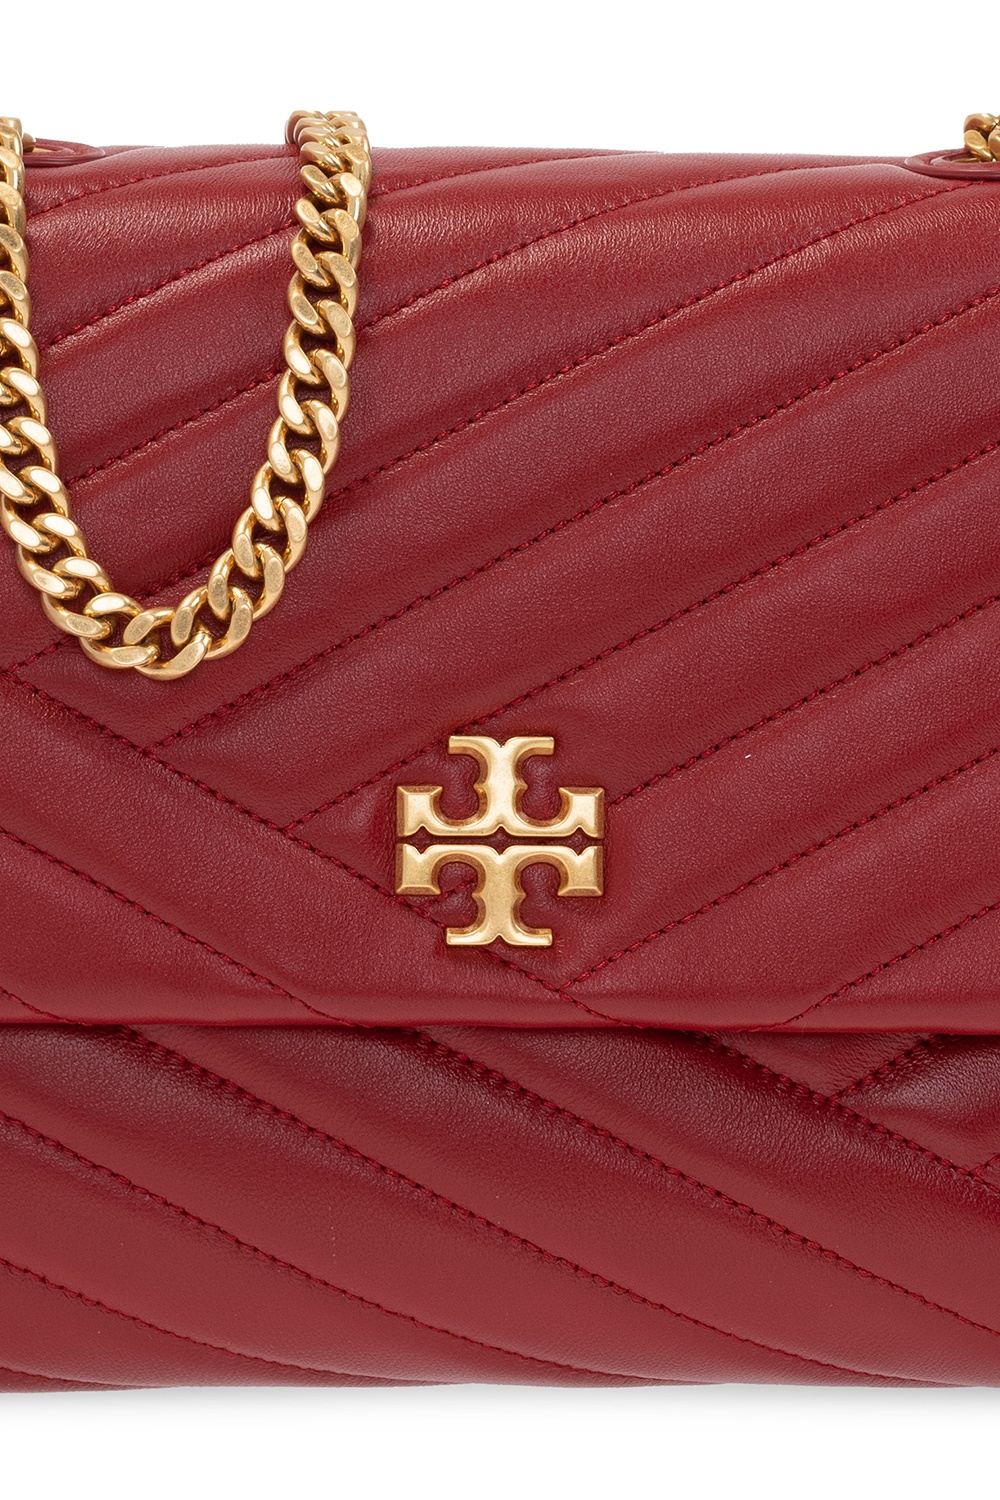 Introducir 104+ imagen tory burch red quilted bag